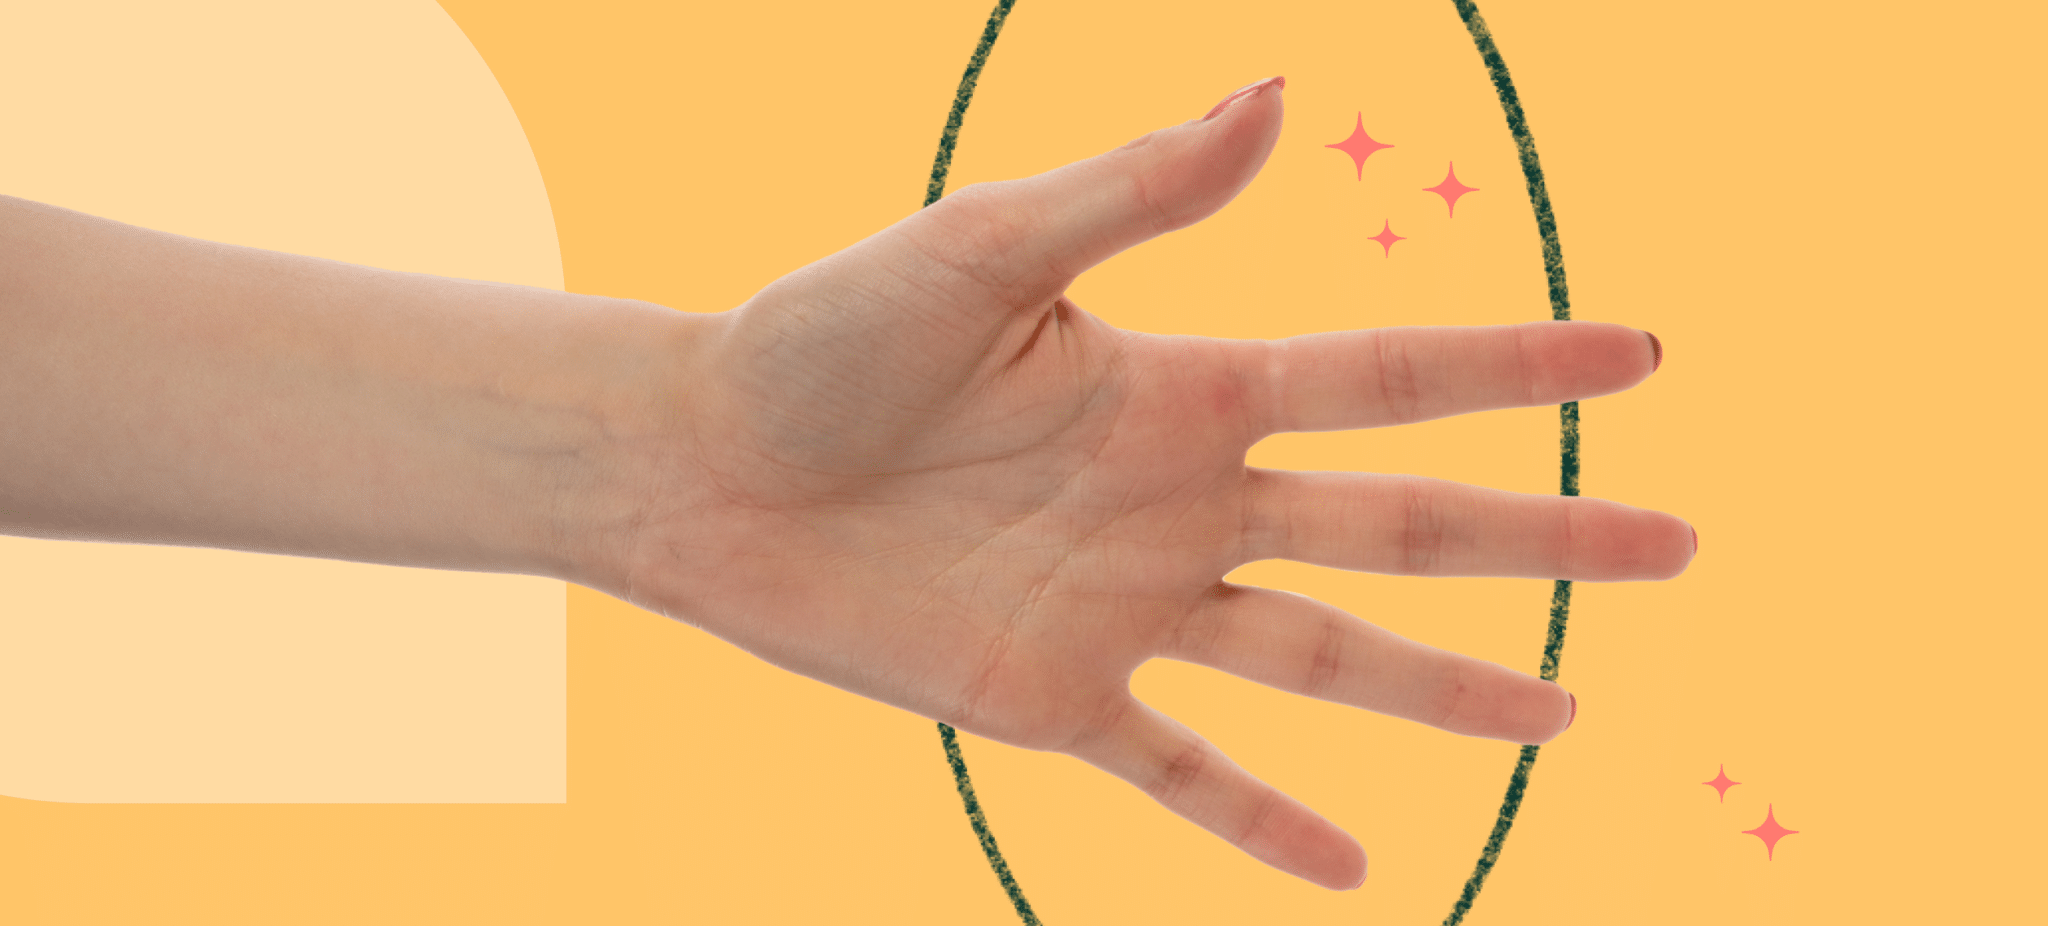 An image of a hand showing 5 fingers to illustrate 5 critical safety skills for transition-age students with mild to mild-moderate disabilities